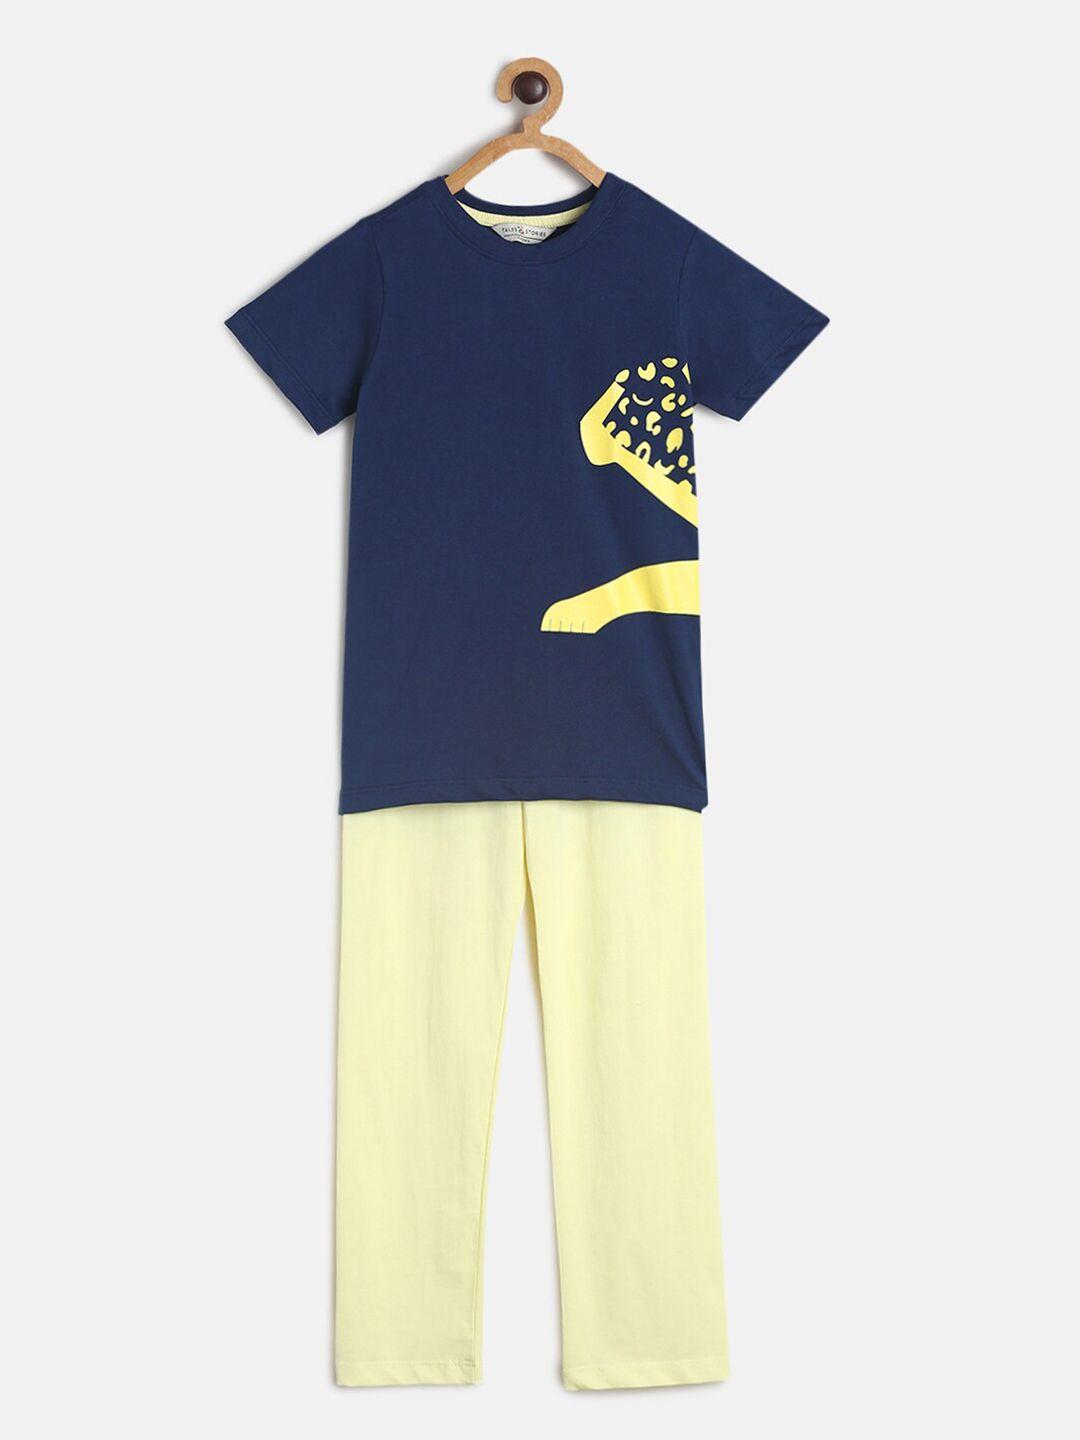 tales & stories boys navy blue & yellow printed cotton night suit